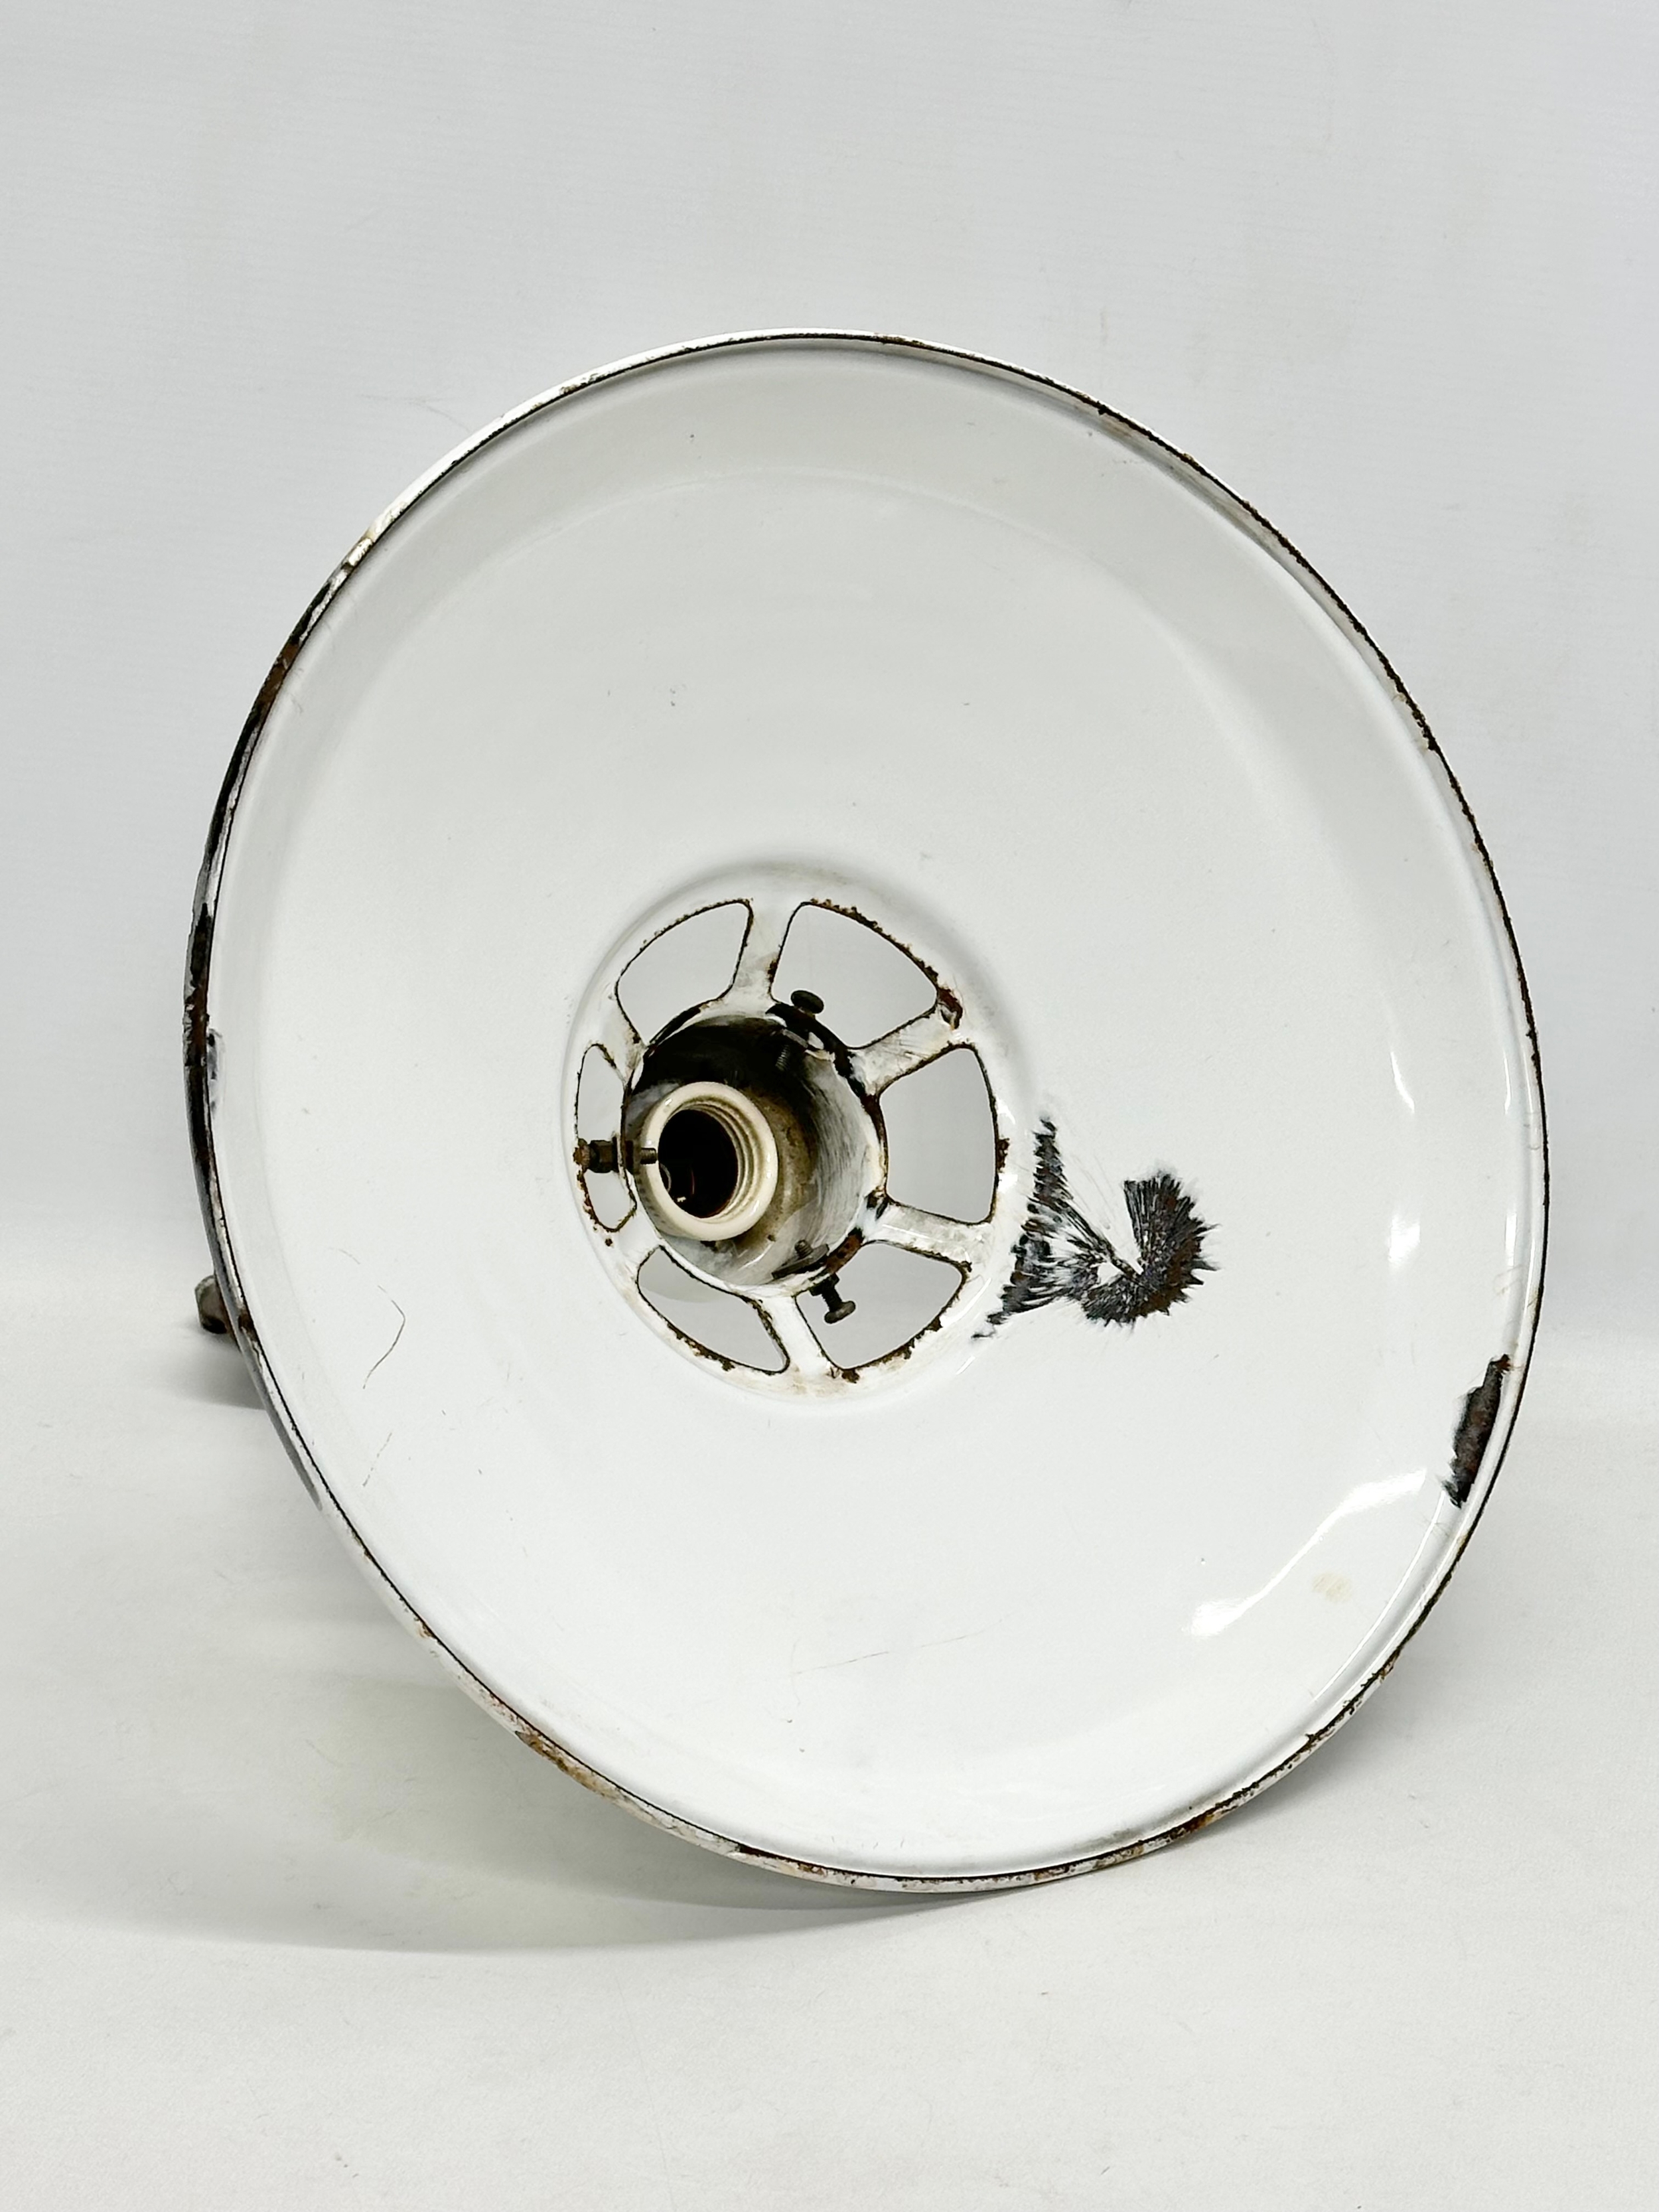 A vintage industrial ceiling light/light fitting. 36x41cm - Image 5 of 5